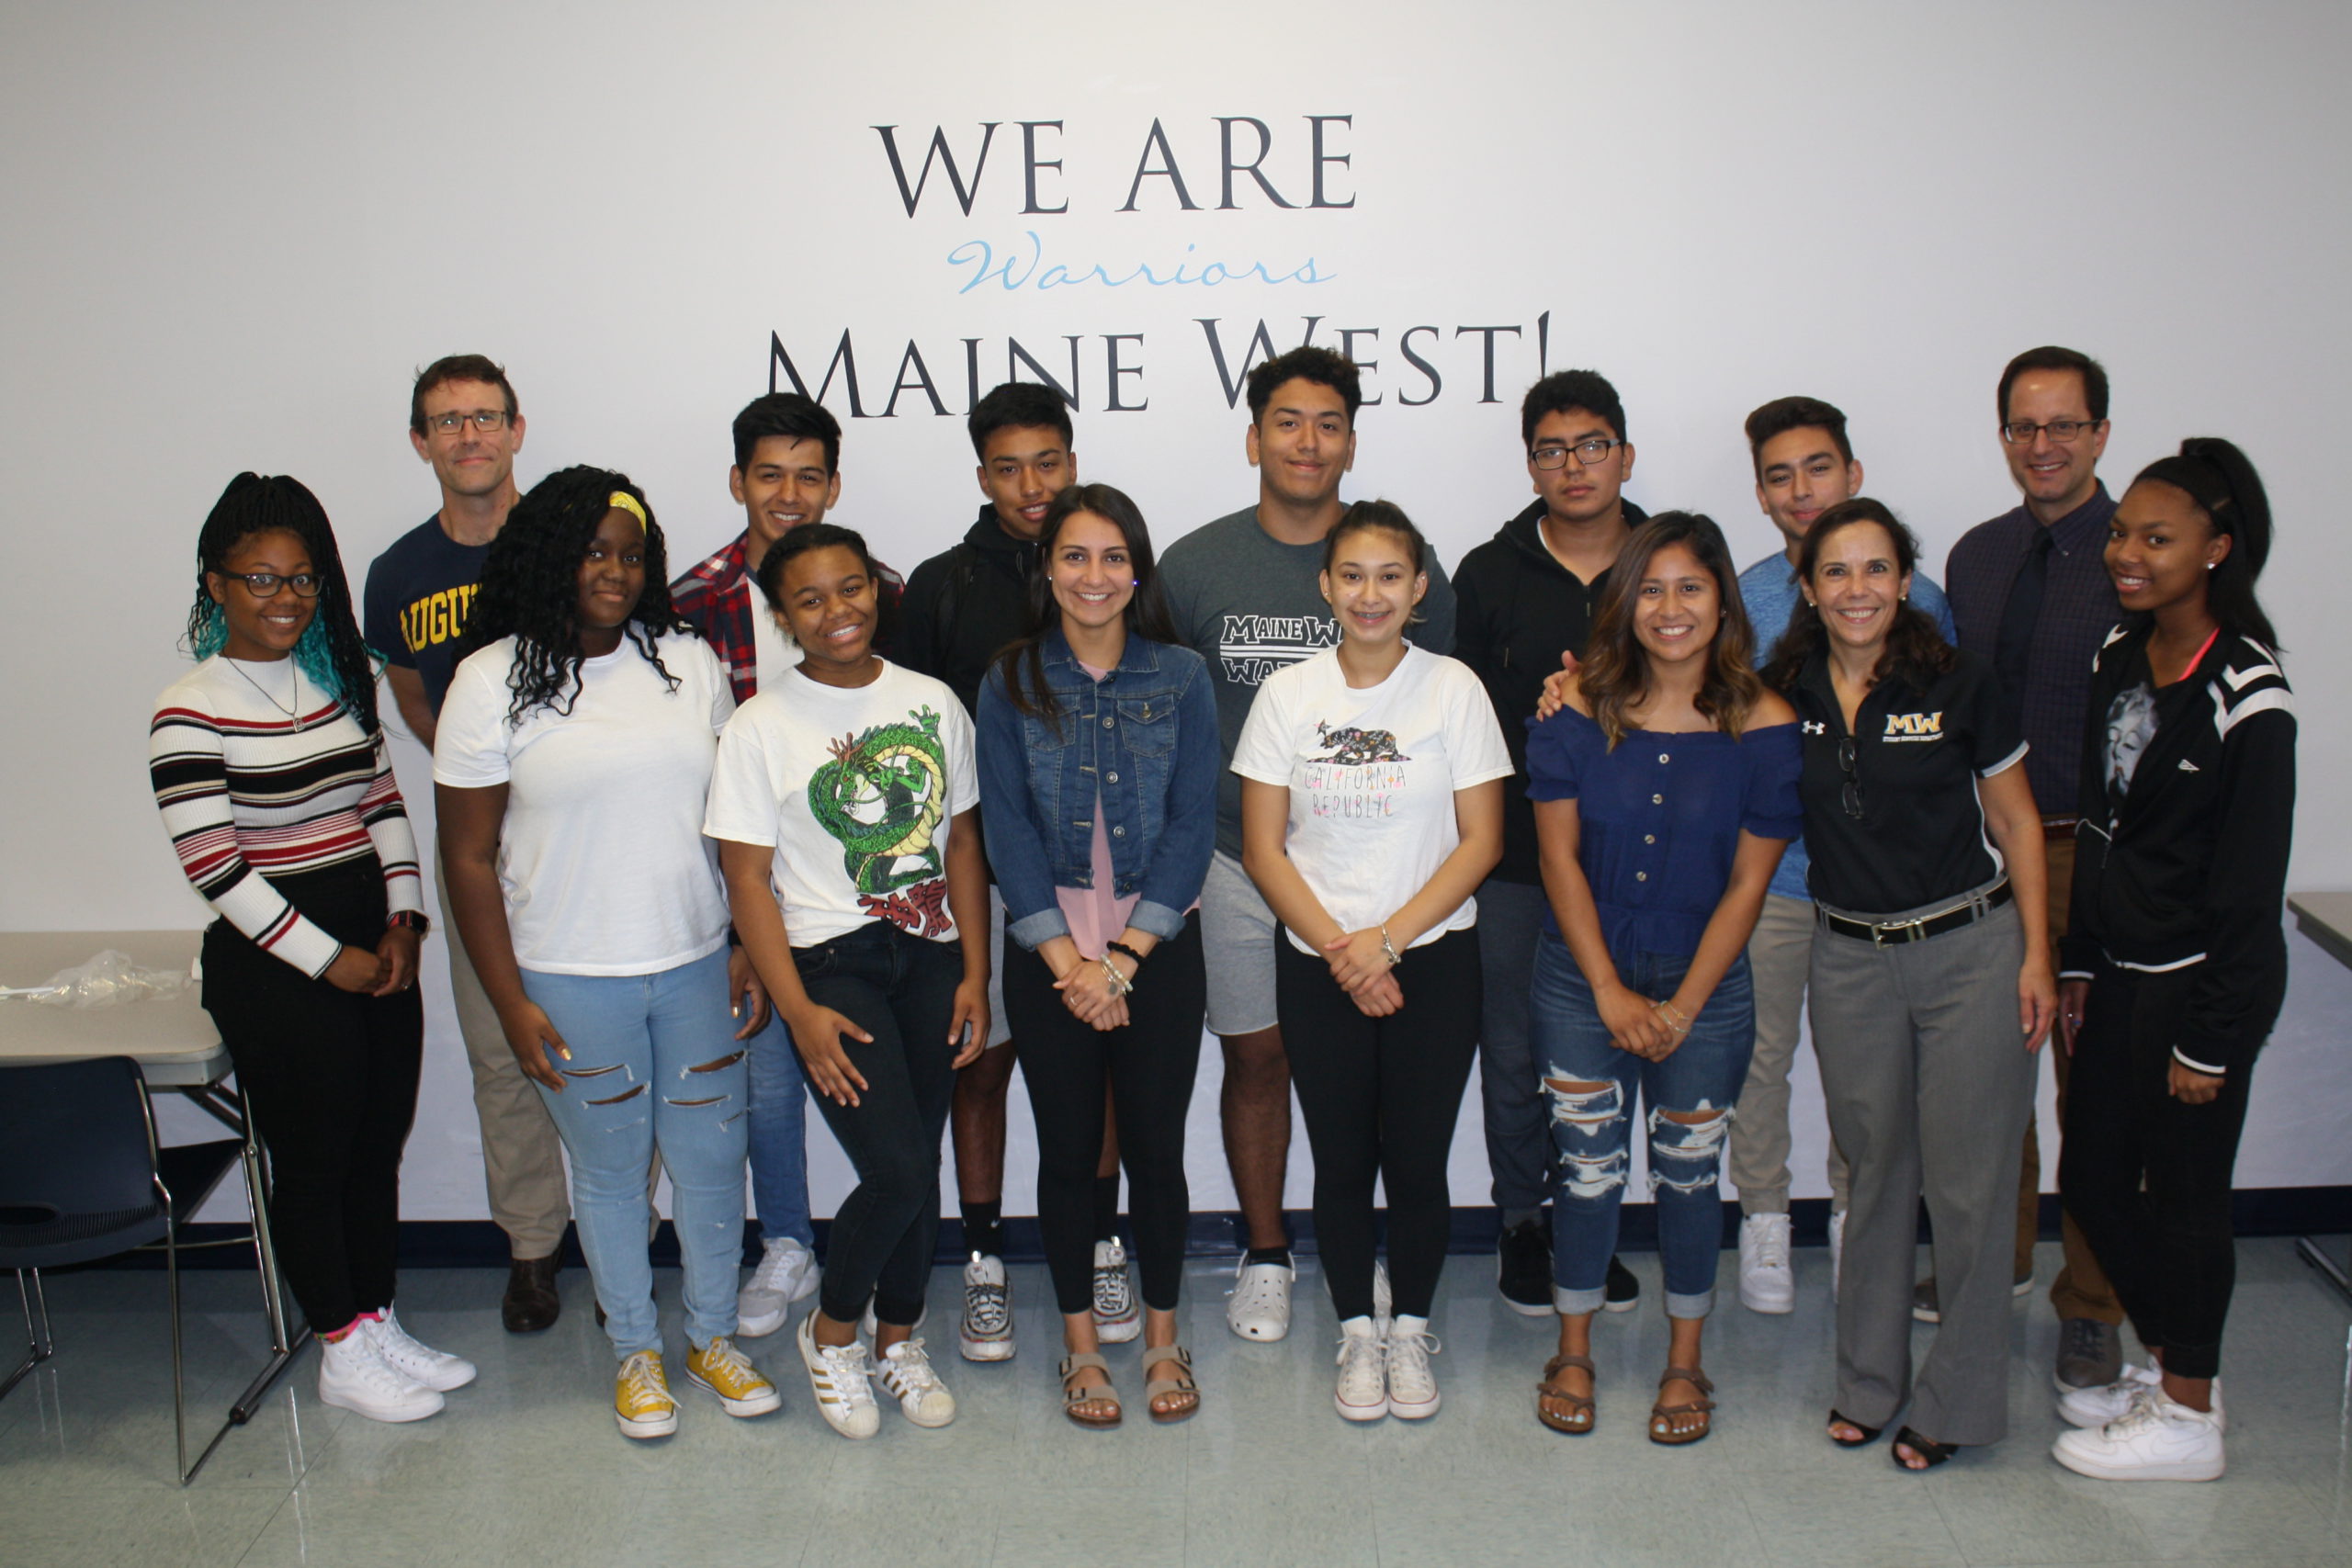 “I feel like I can be successful at Maine West” and “I know an adult I can talk with if I need help” are just two of the comments students have made about the ASCEND program, which illustrates the district is successfully addressing the Latino education crisis by improving the achievement of hispanic students.